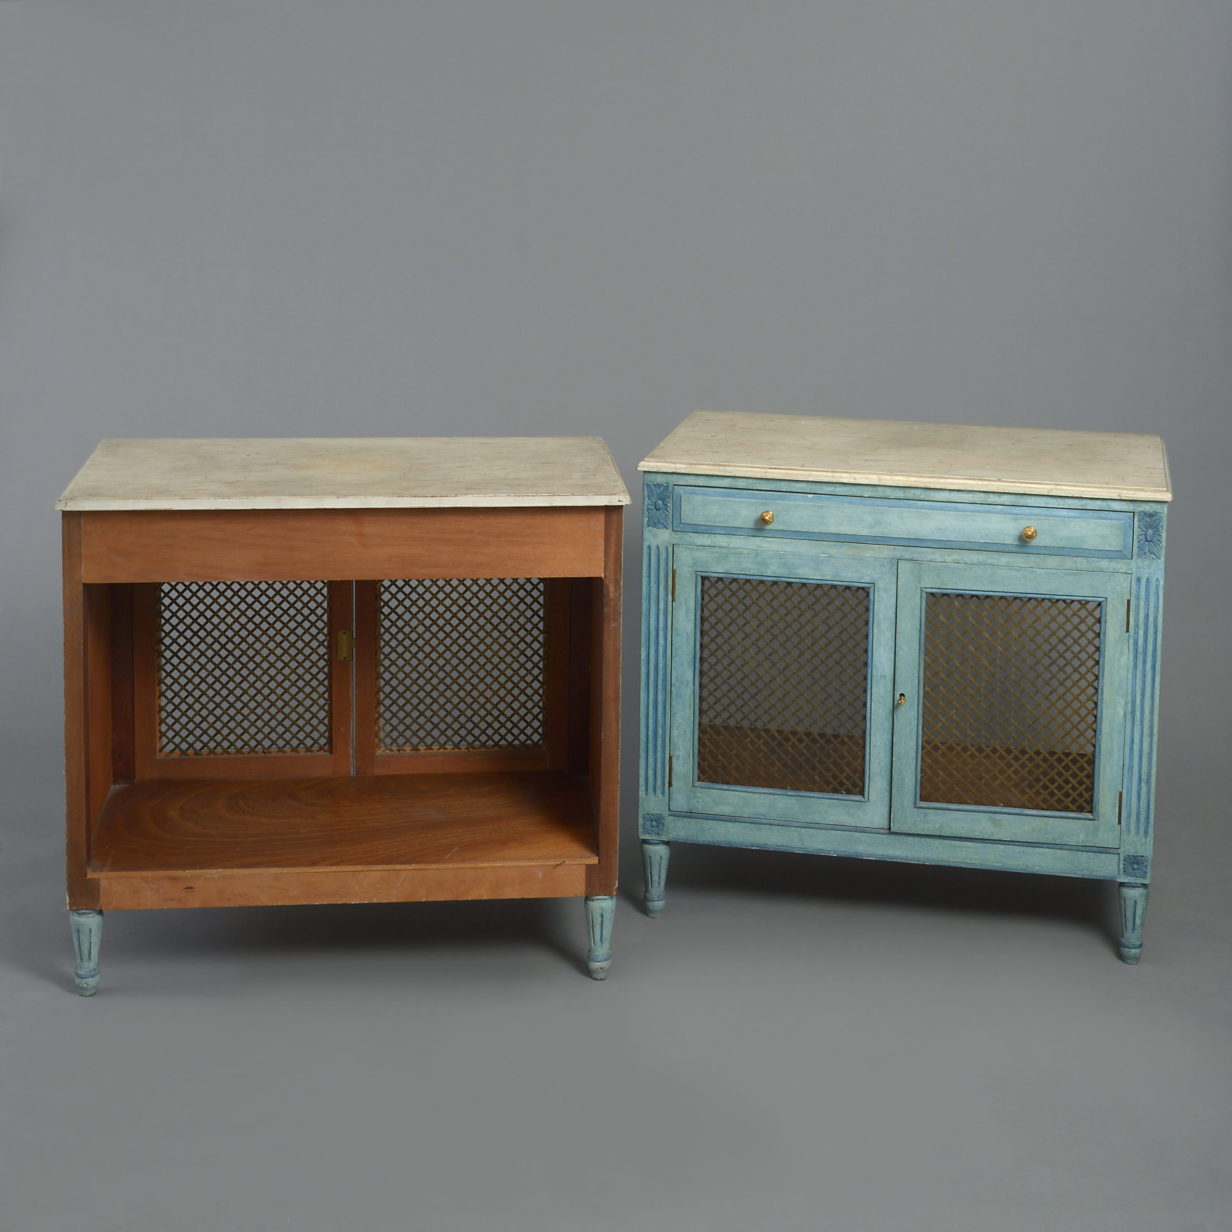 Pair of painted side cabinets